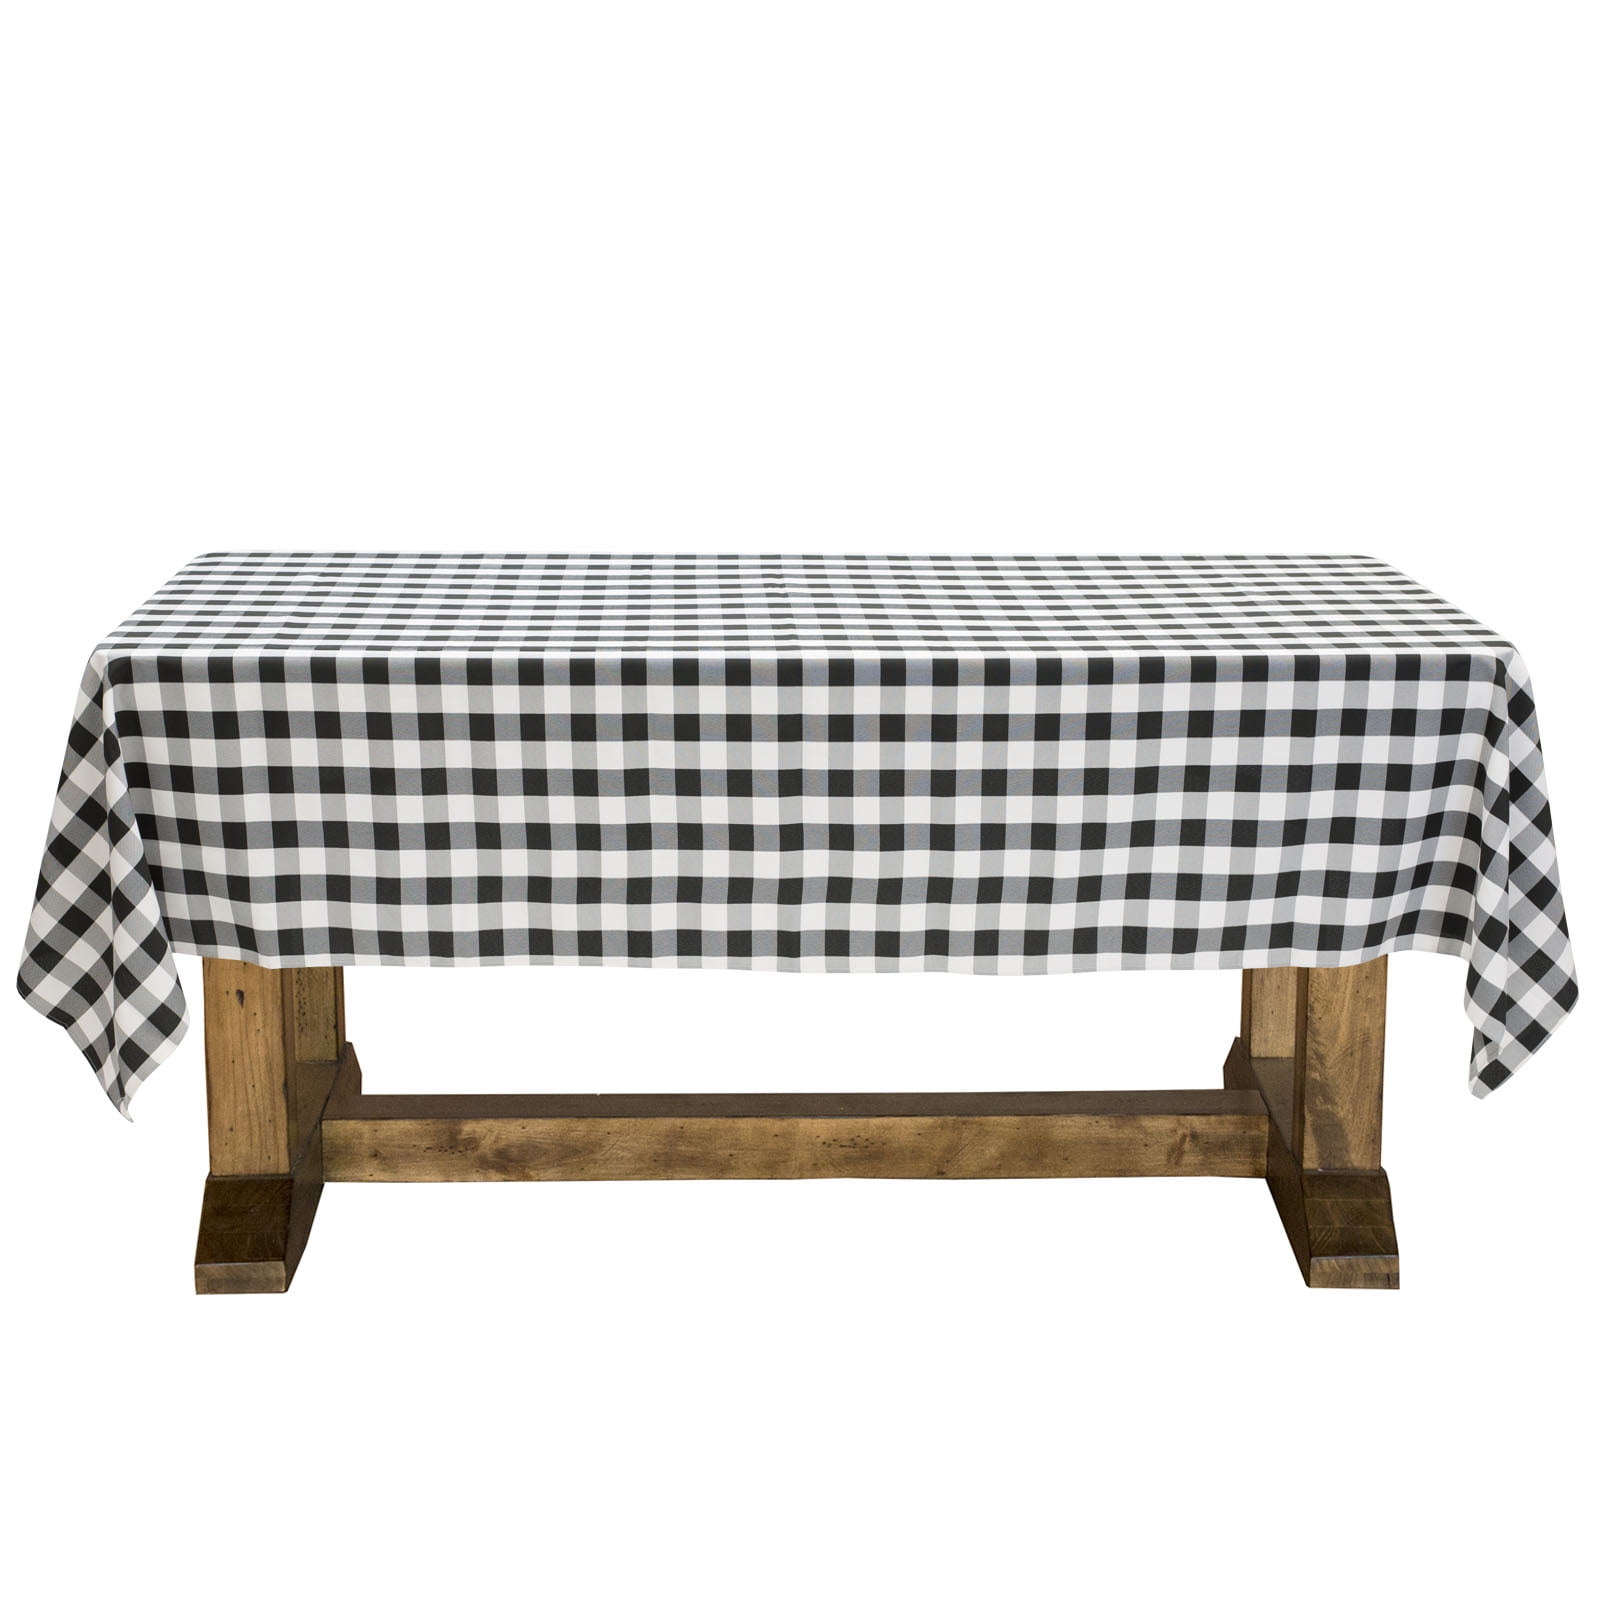 Tablecloth Black And White Monochrome Plaid Gingham Neutral Cabin Cotton Sateen